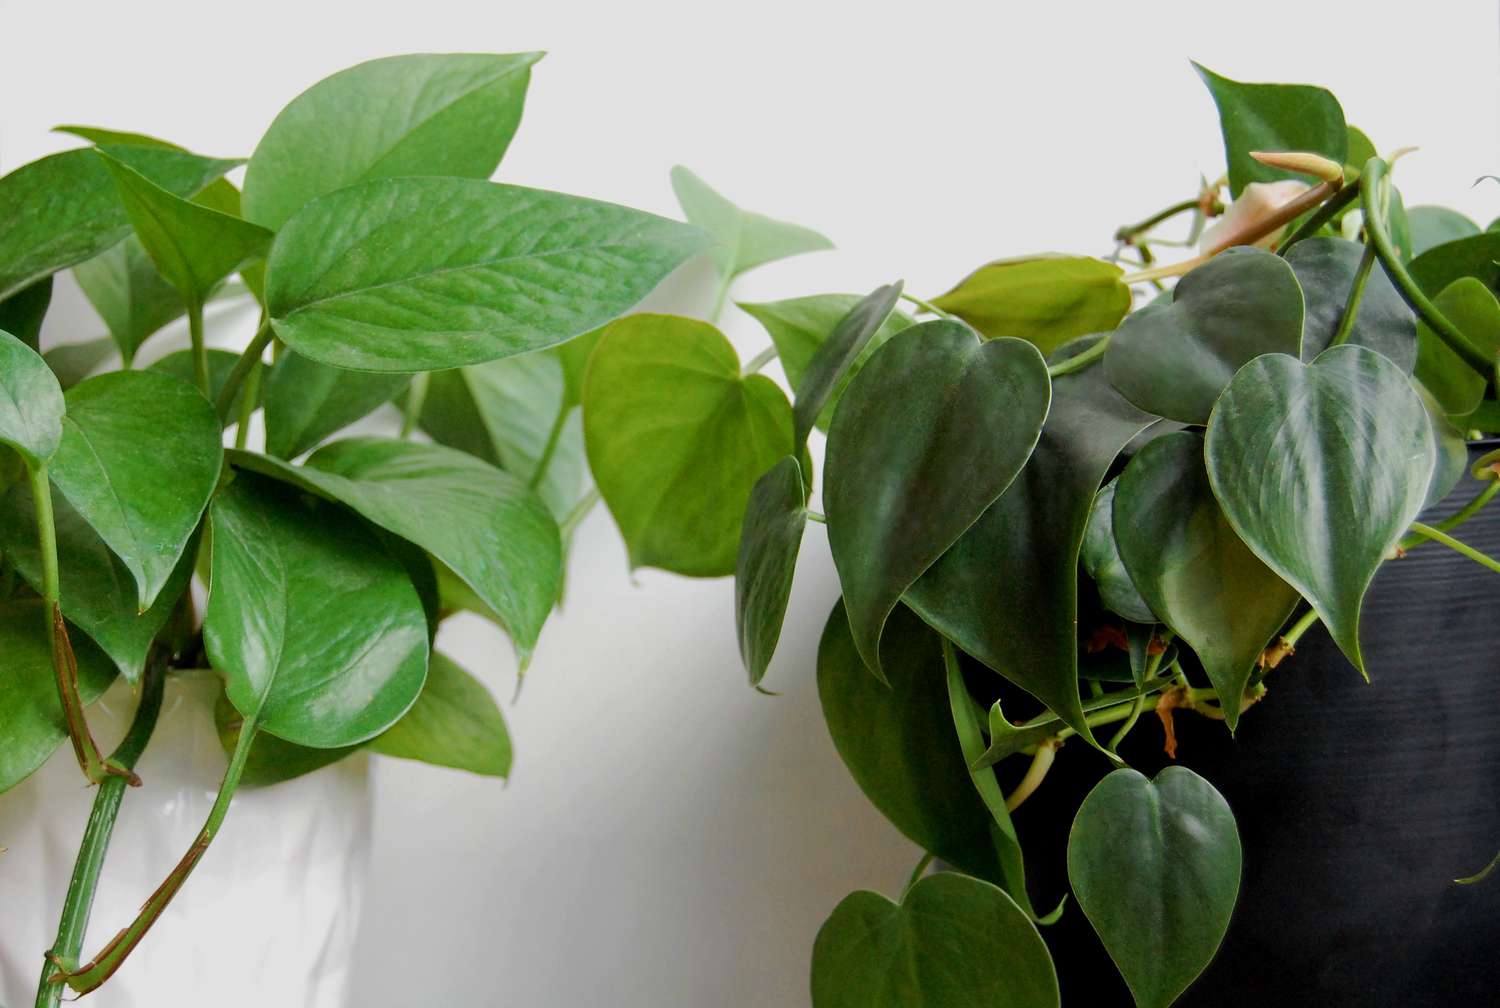 A green pothos in a white pot sits next to a heart-leaf philodendron in a black pot.